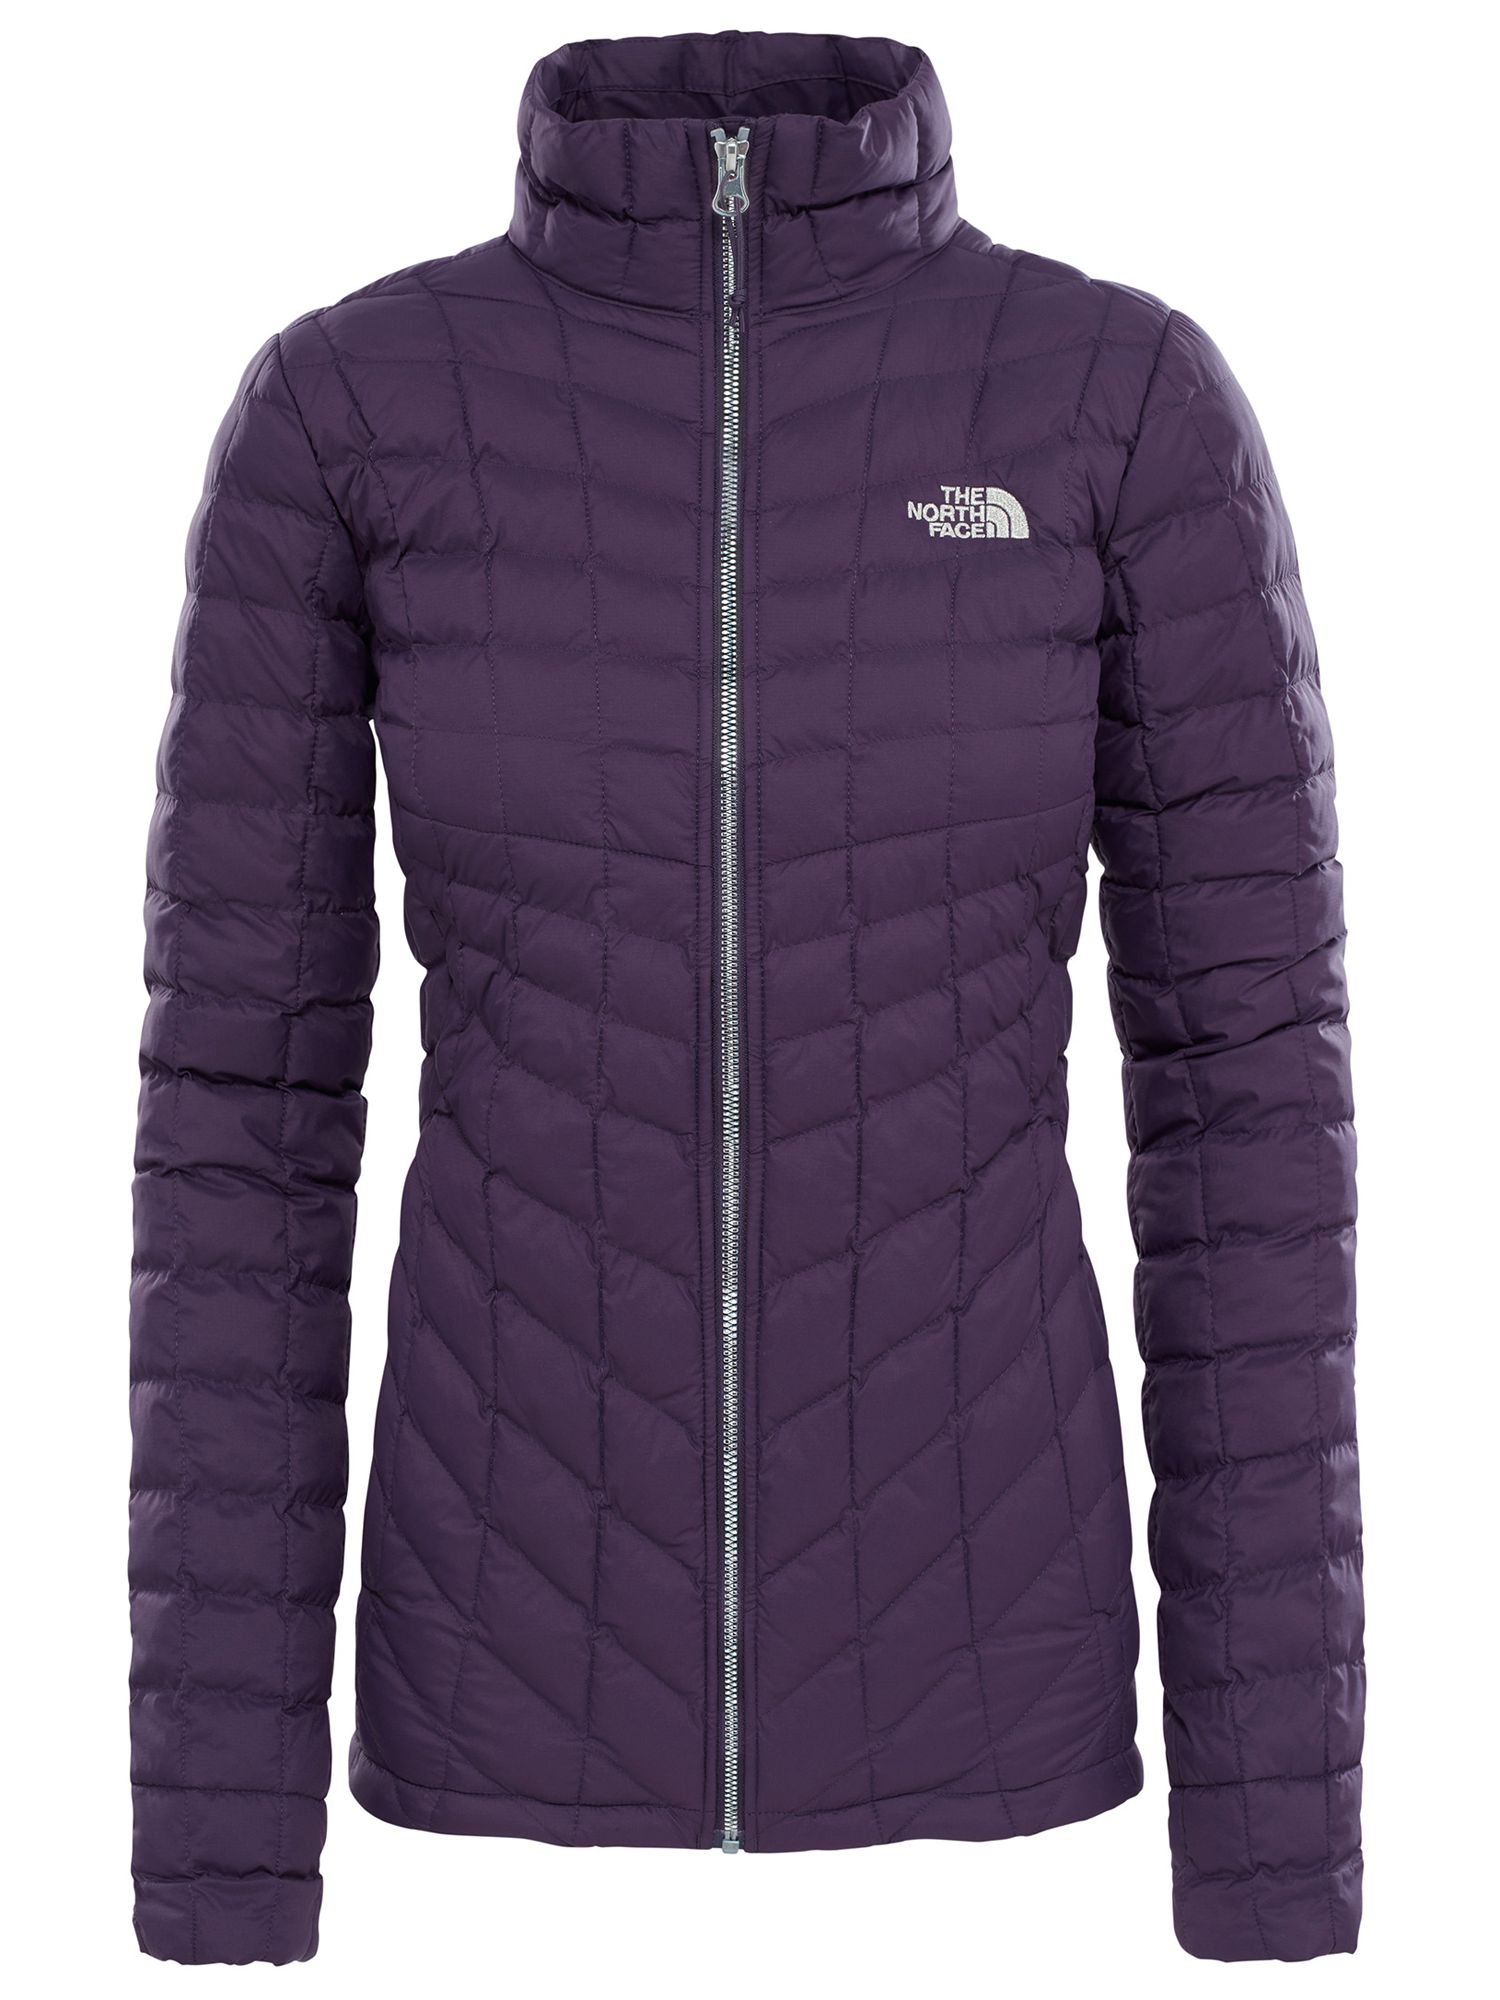 The North Face Thermoball Zip-In Women's Insulated Jacket, Purple, XL